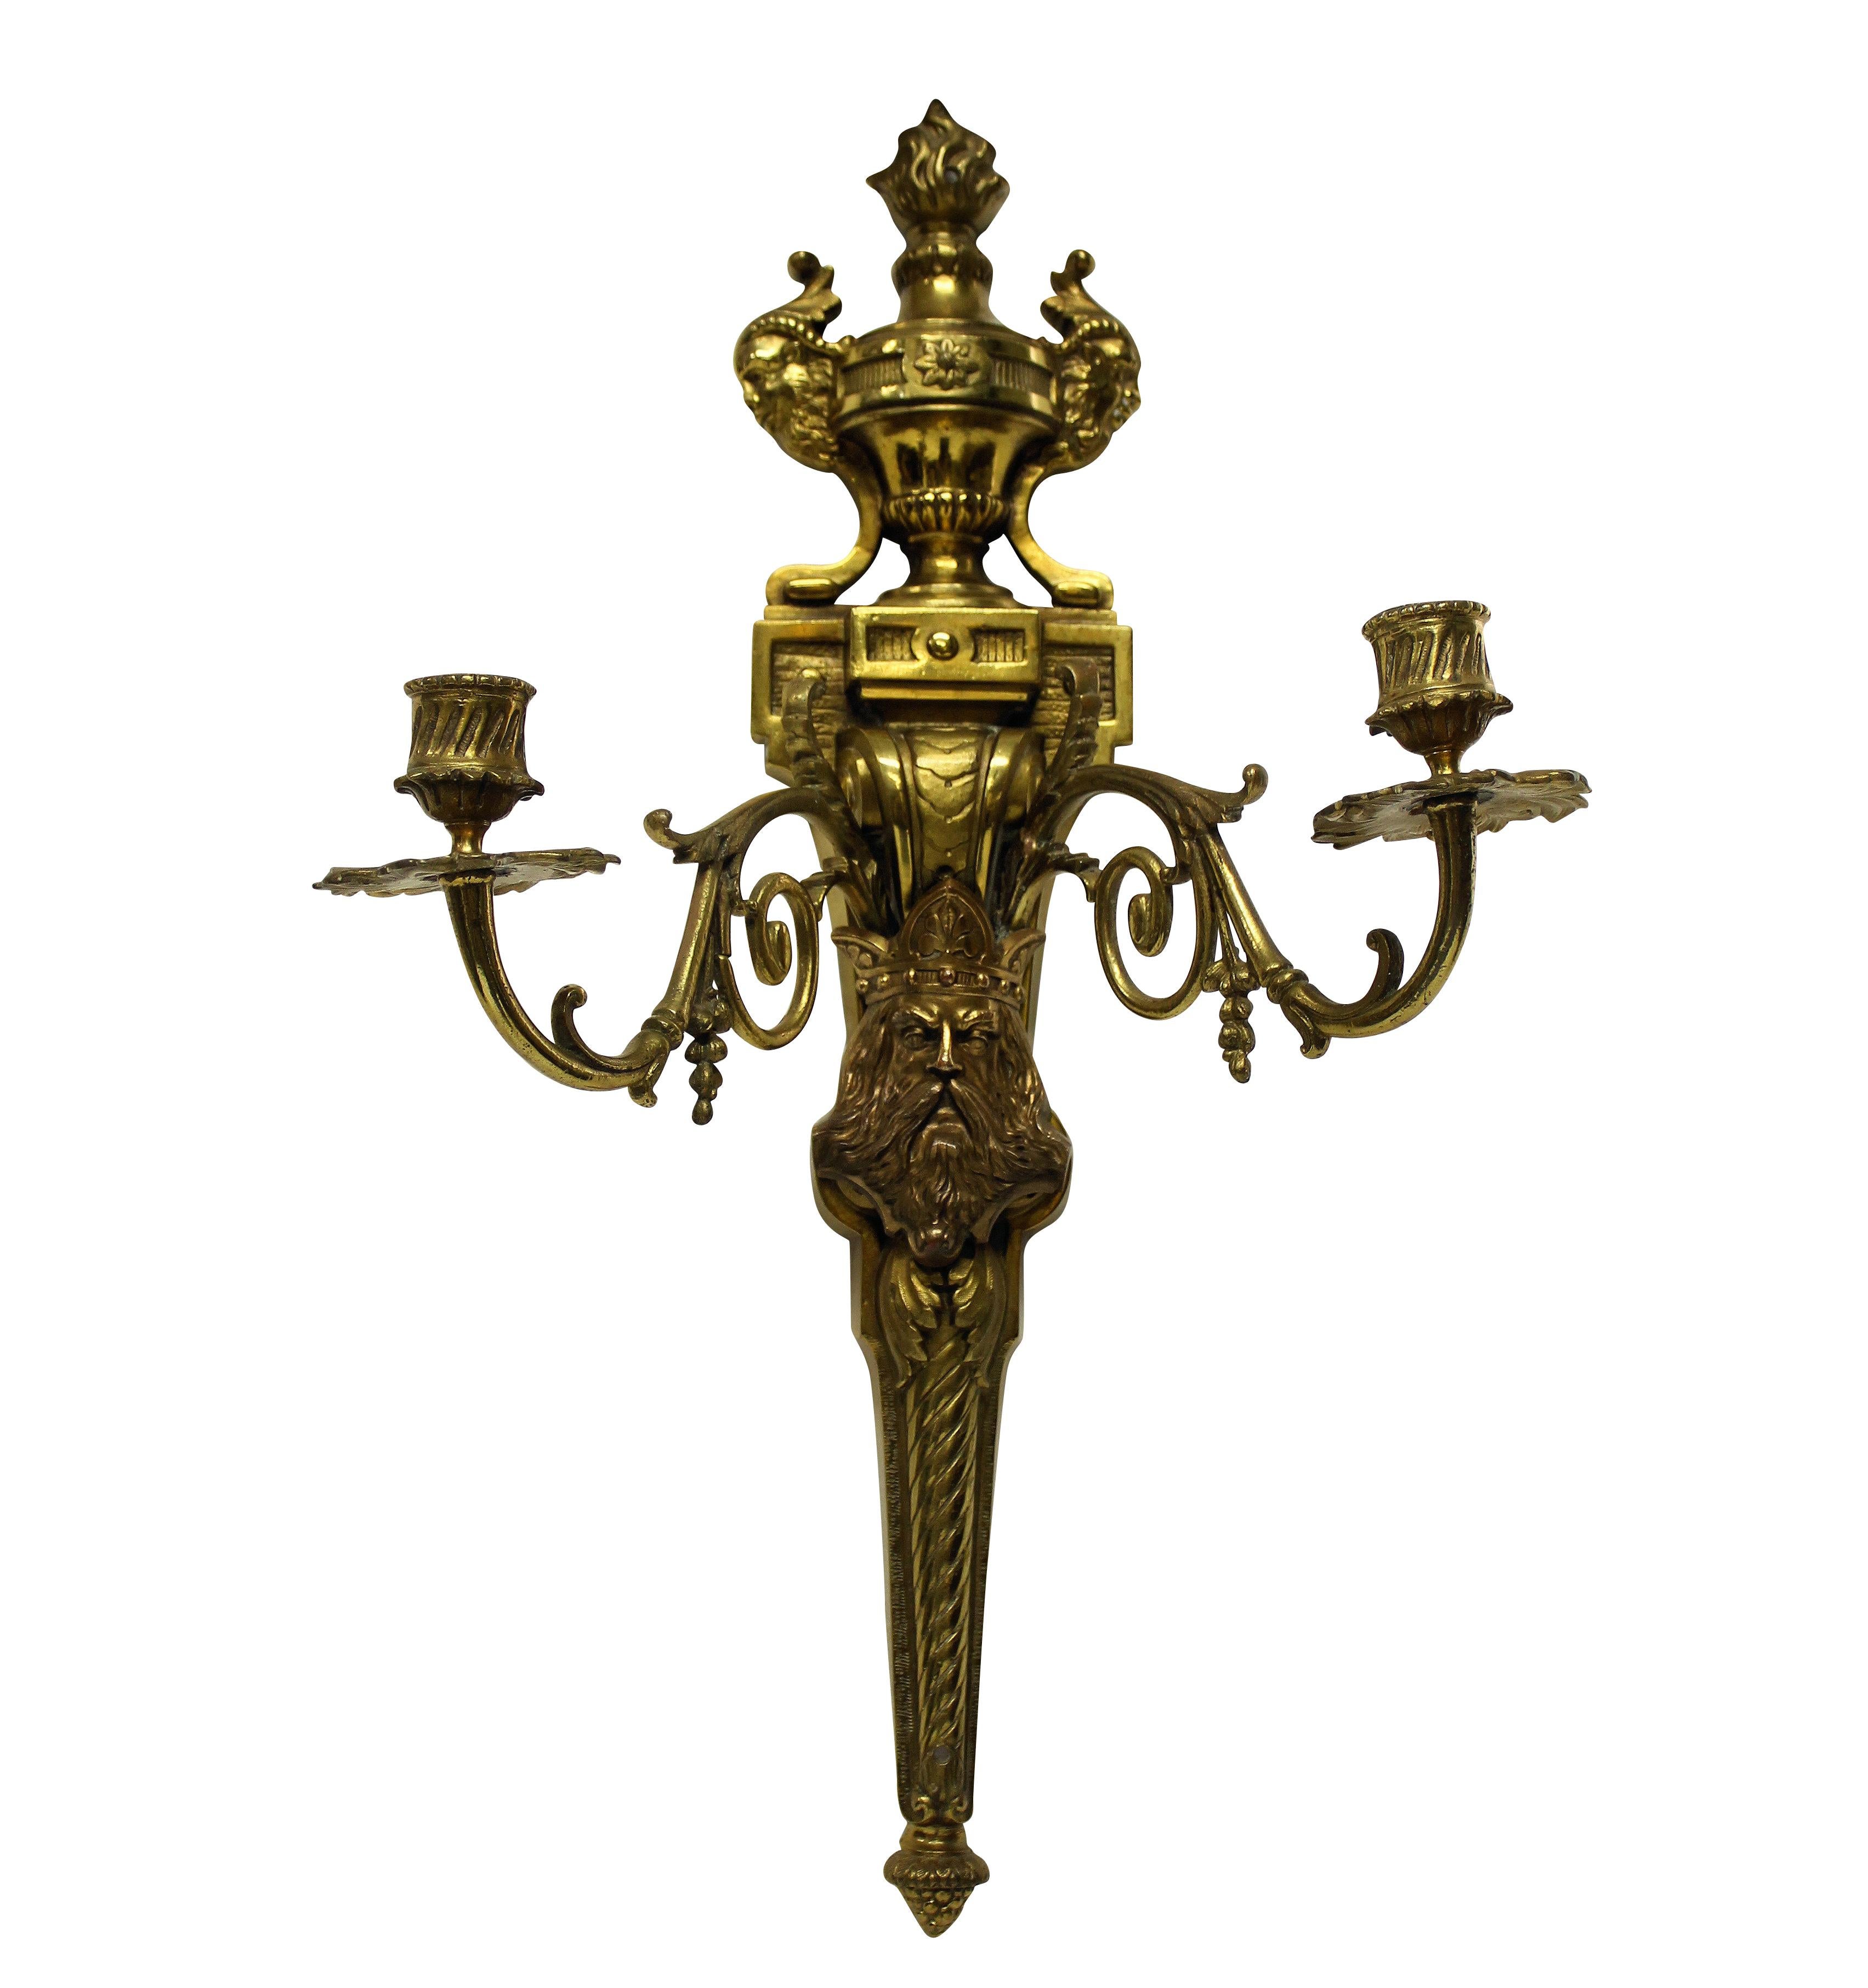 A pair of English, finely burnished Victorian wall sconces in gilt bronze. Depicting in the centre, a crowned King and with mythological motifs.